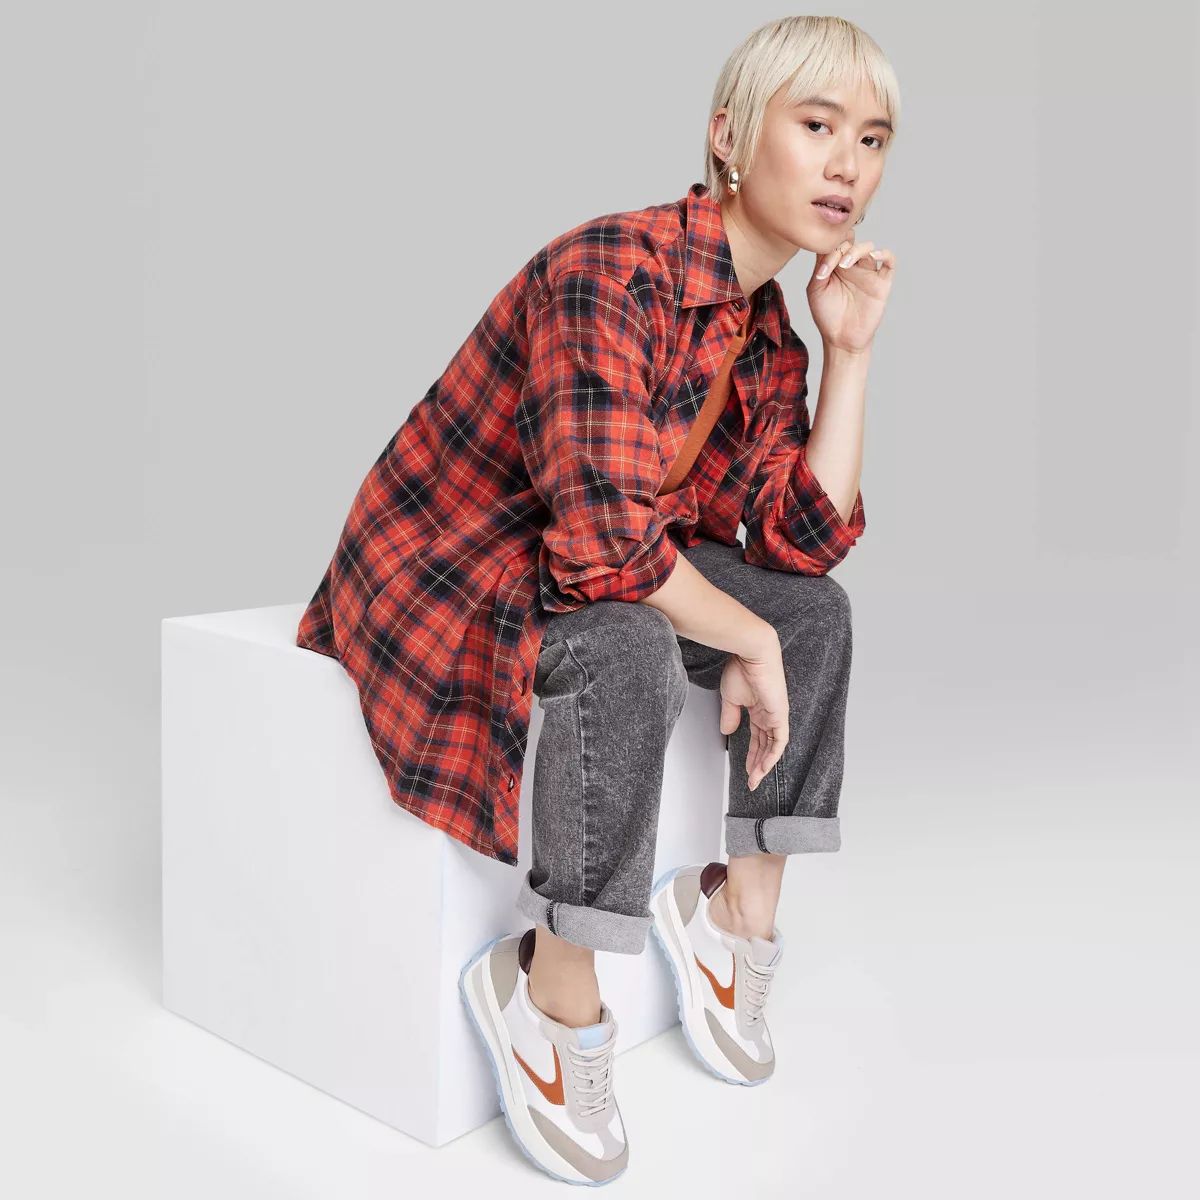 Women's Oversized Button-Down Flannel Shirt - Wild Fable™ Plaid | Target